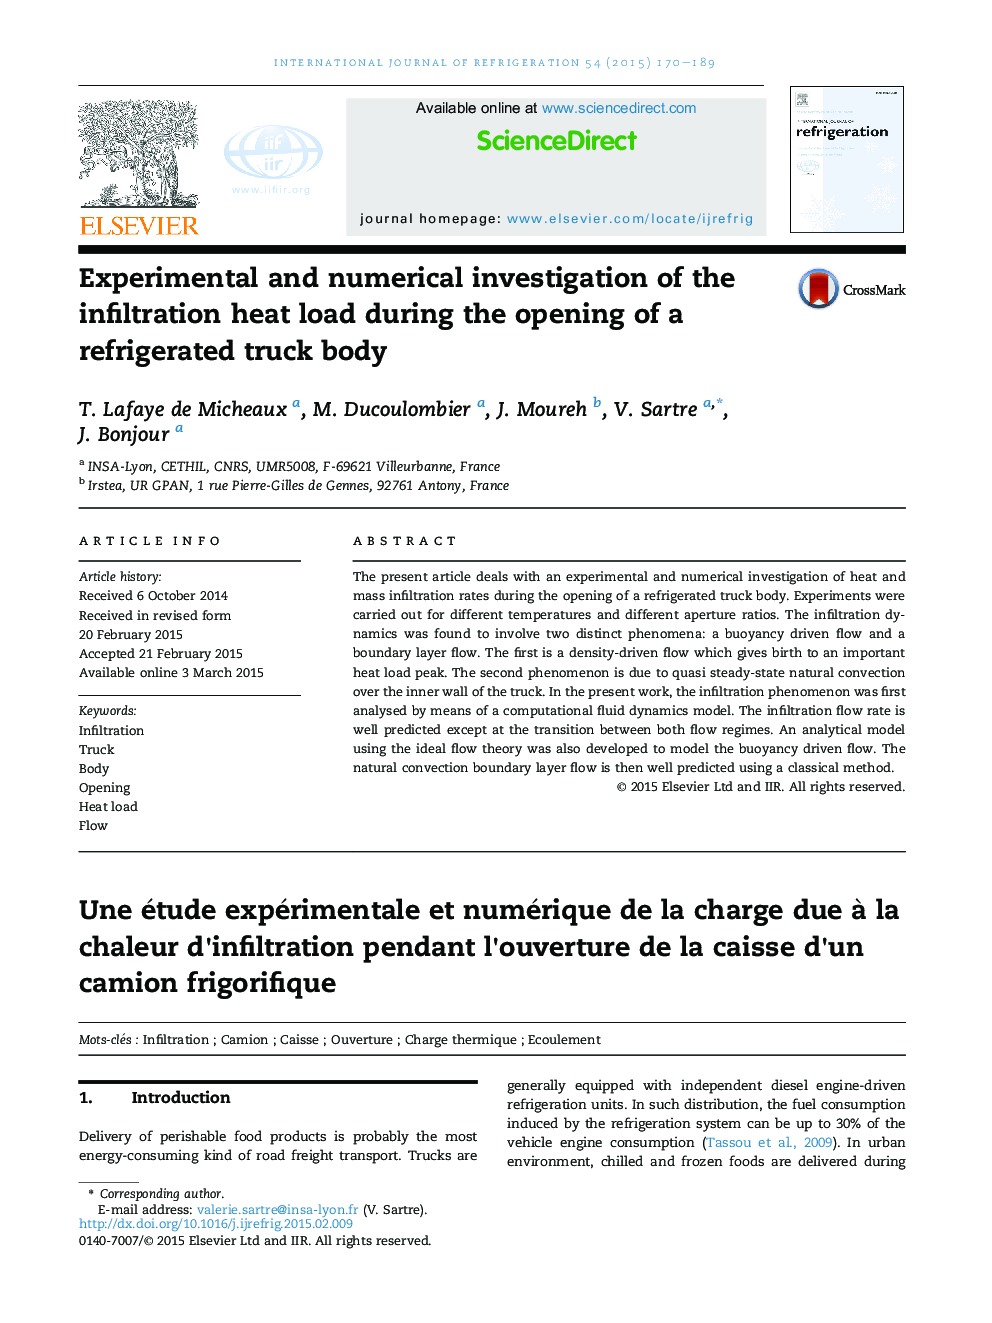 Experimental and numerical investigation of the infiltration heat load during the opening of a refrigerated truck body